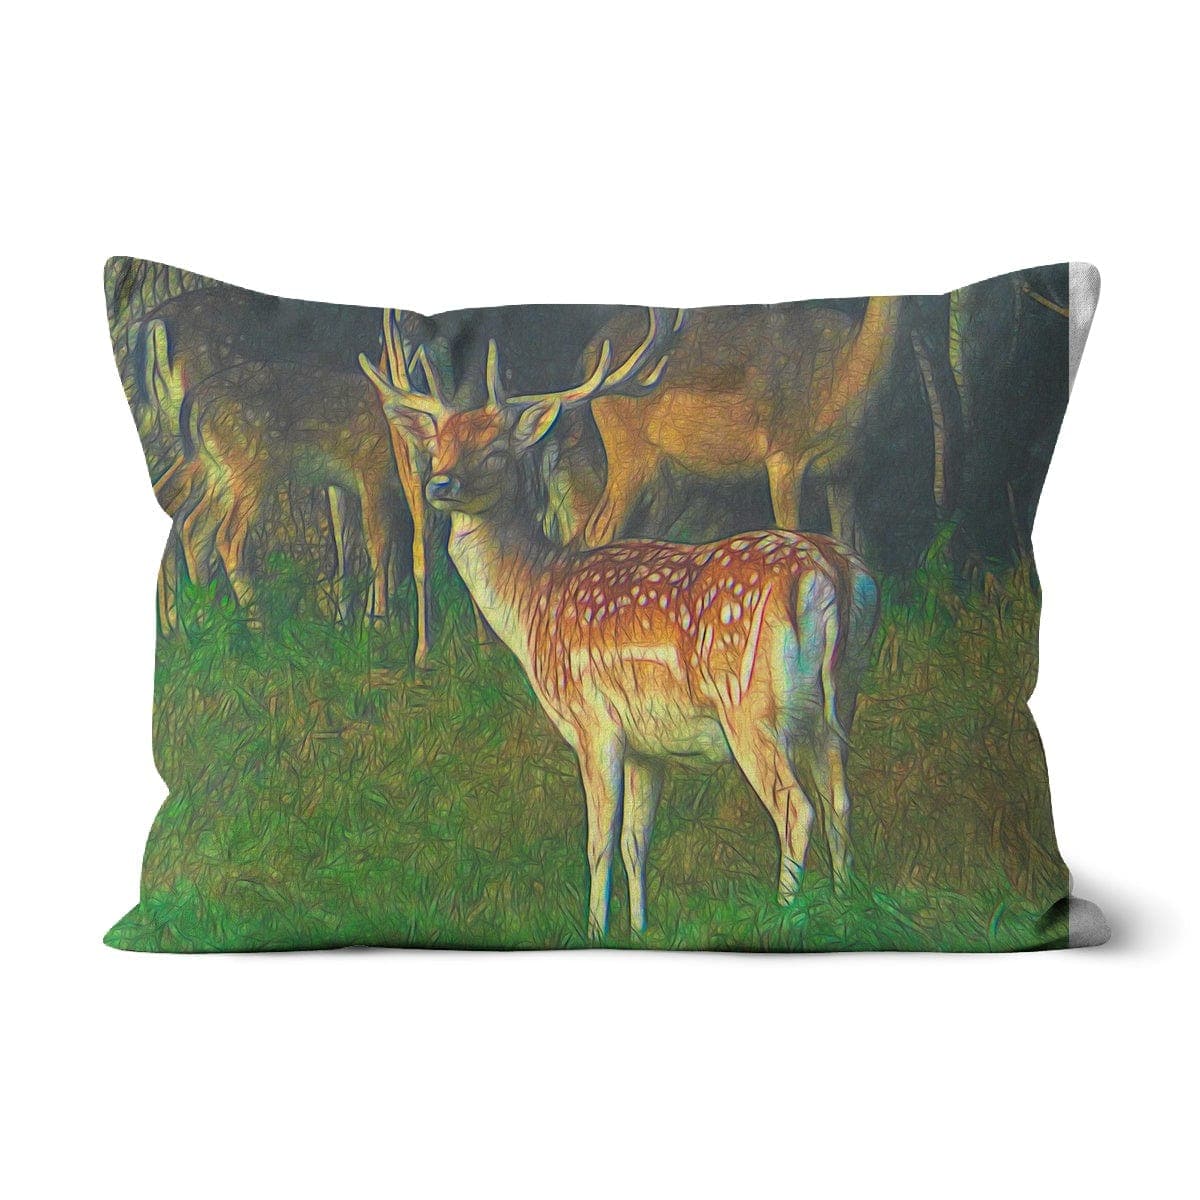 Male deer, Cushion,by Mother Nature Art